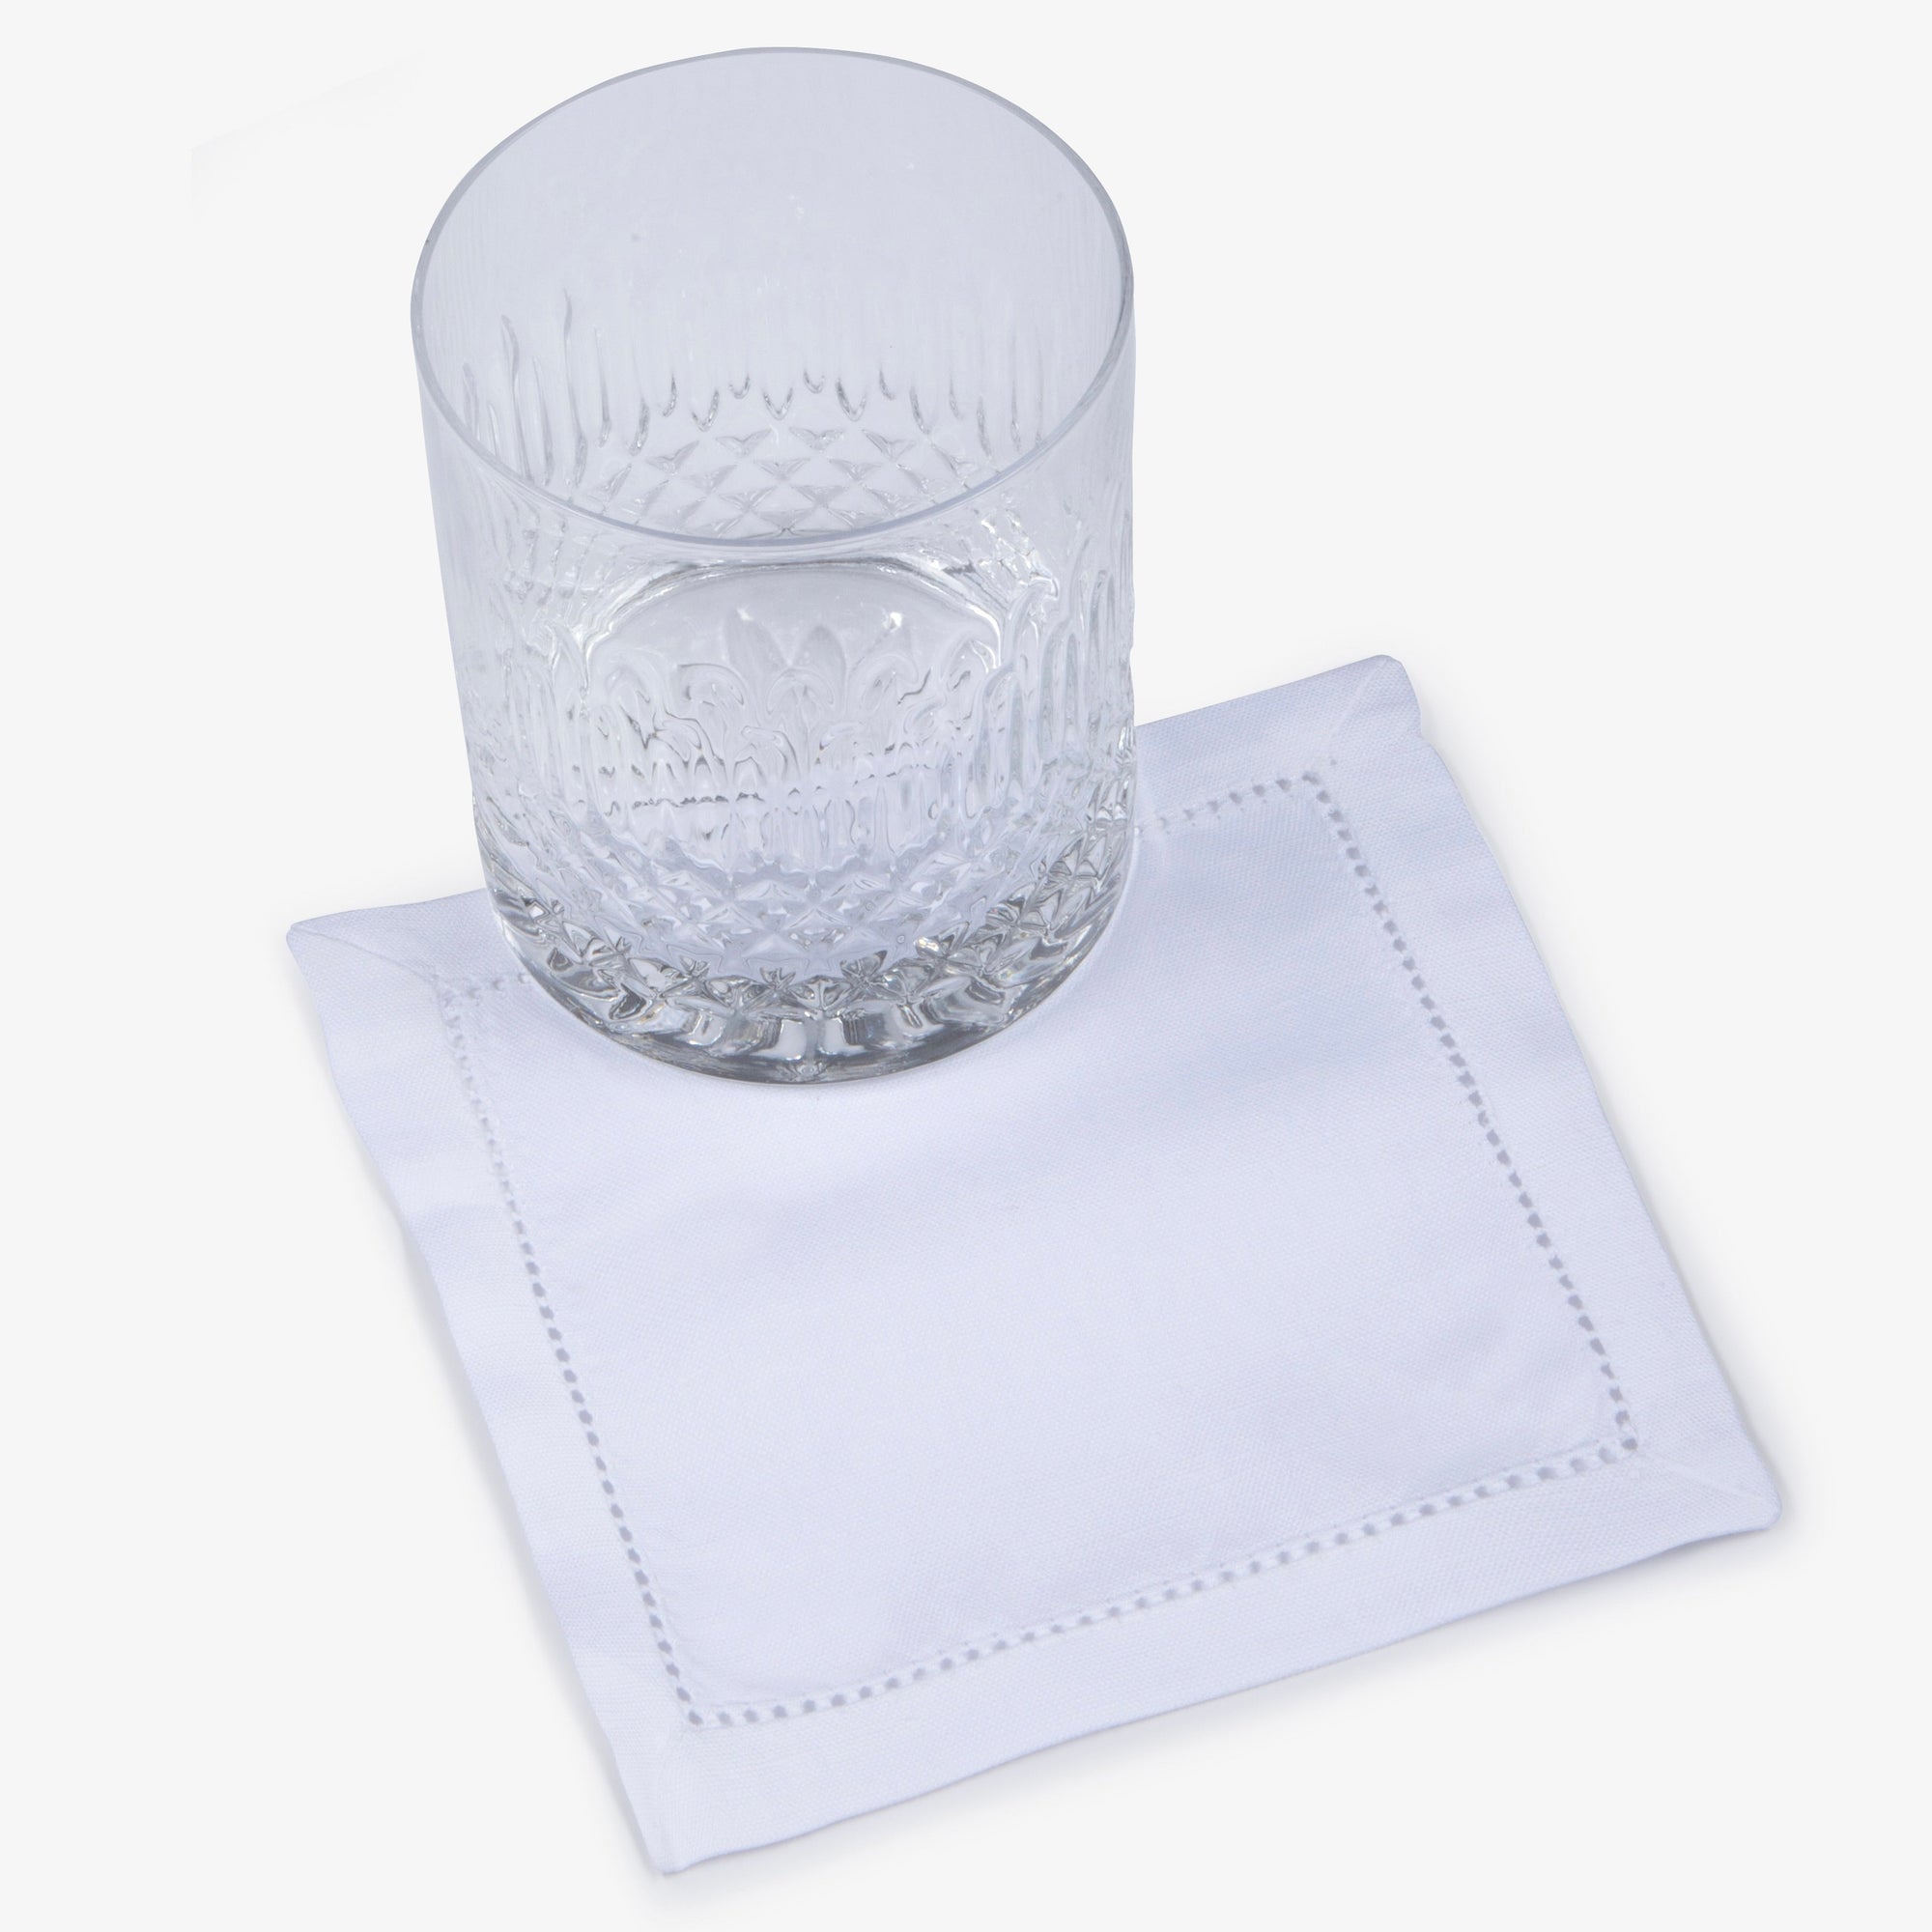 Carraway Cocktail Napkin - The Finishing Store South Africa